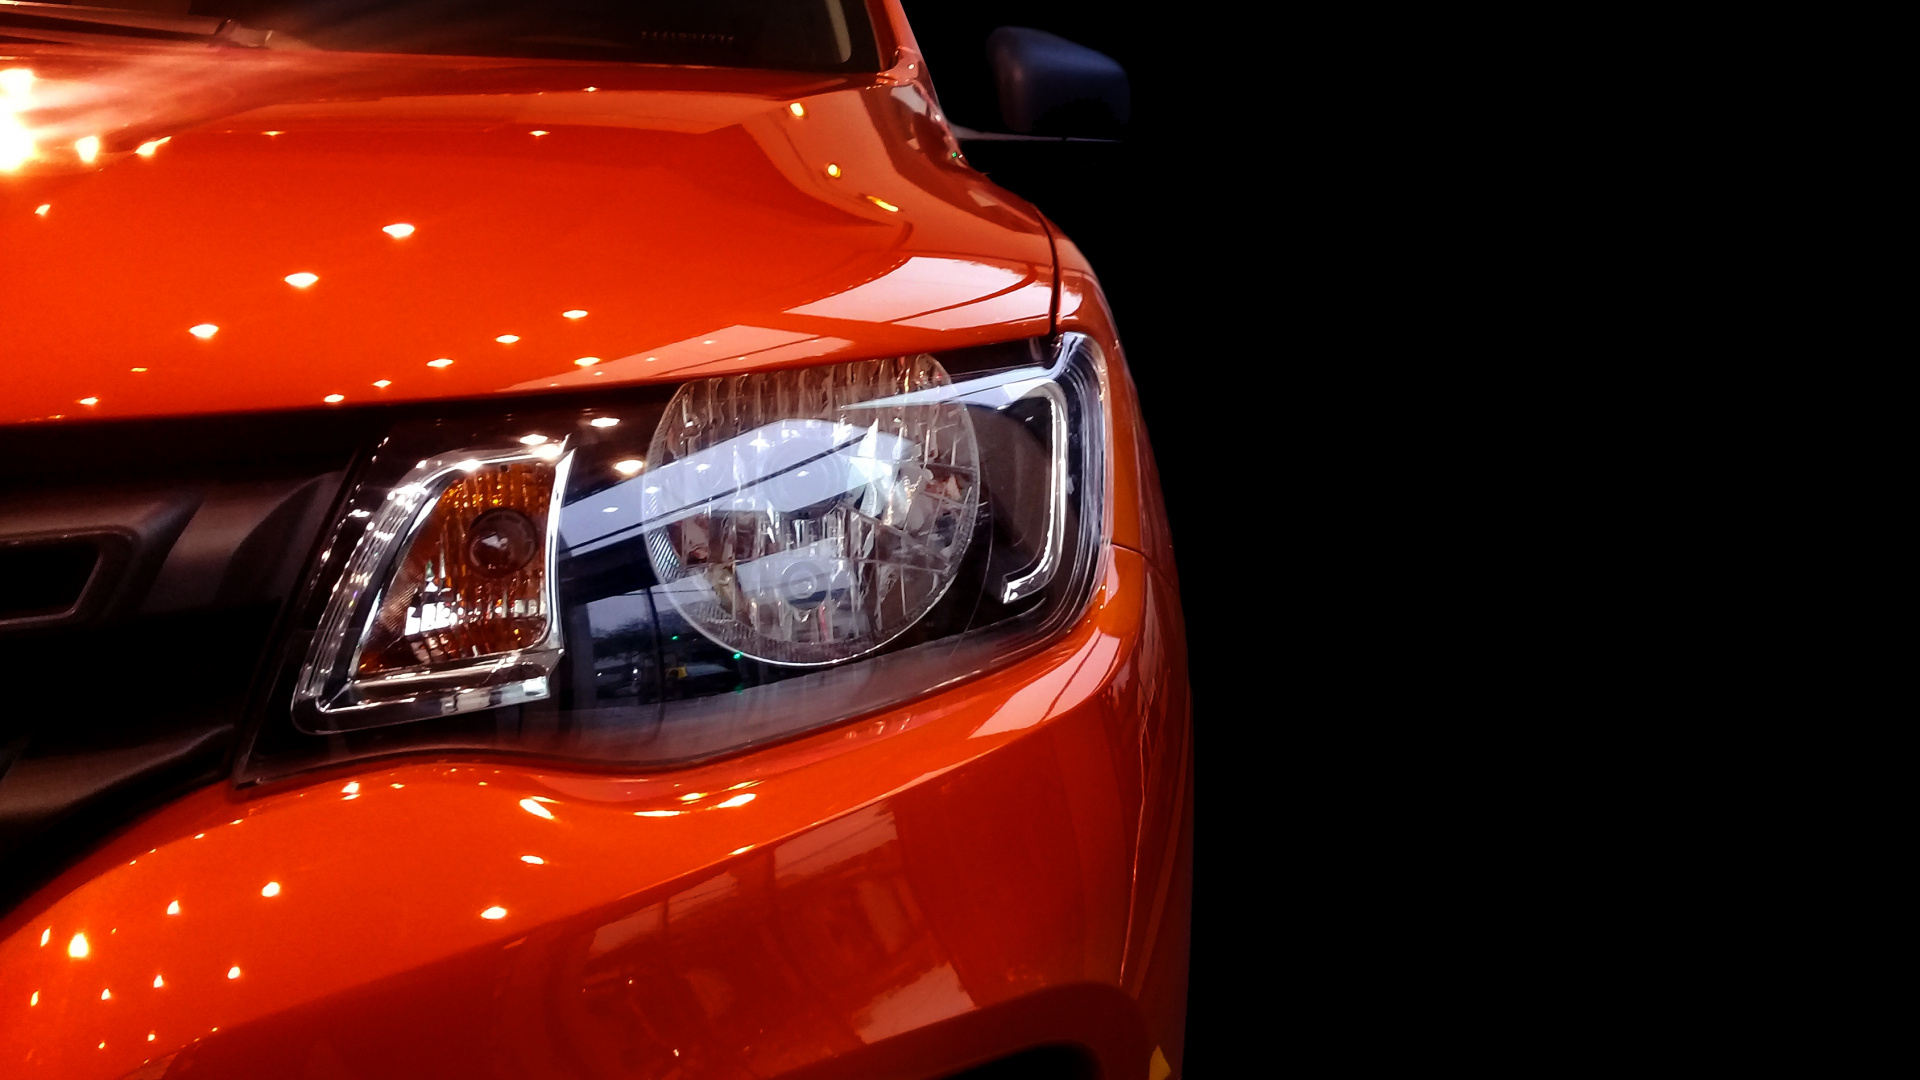 Orange Car With White Lights. Wallpaper in 1920x1080 Resolution